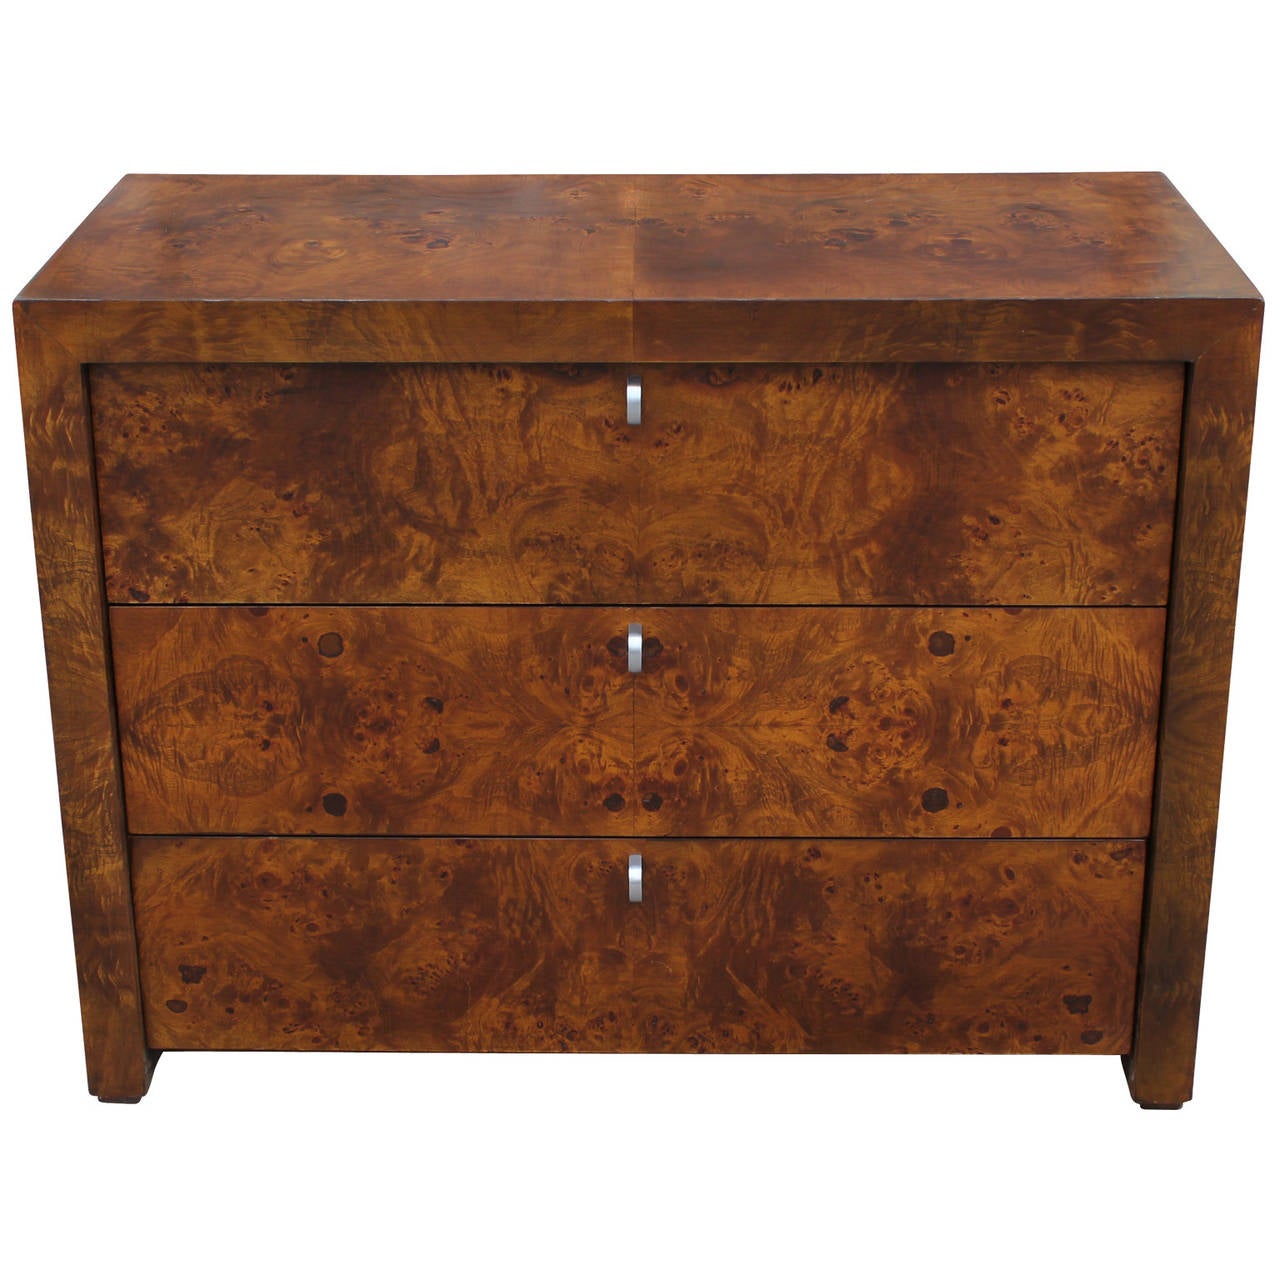 Beautiful three drawer chest with burl veneer. Chest has stunning grain and in nice restored condition. Small Version also available.